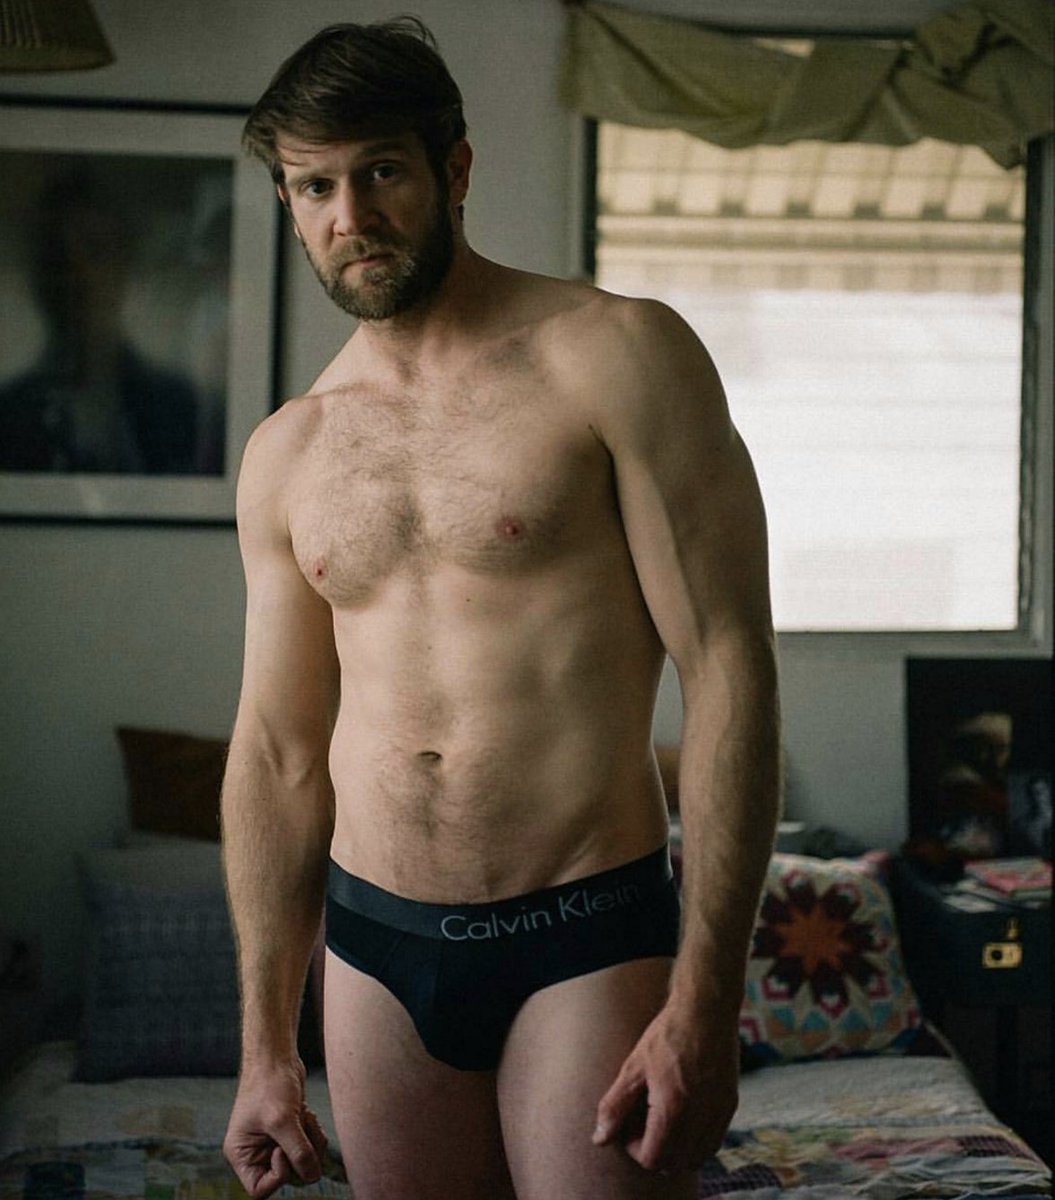 Colby Keller: 'I’m Going to Vote for Trump! pic.twitter.com/w8EnPVdFqh...